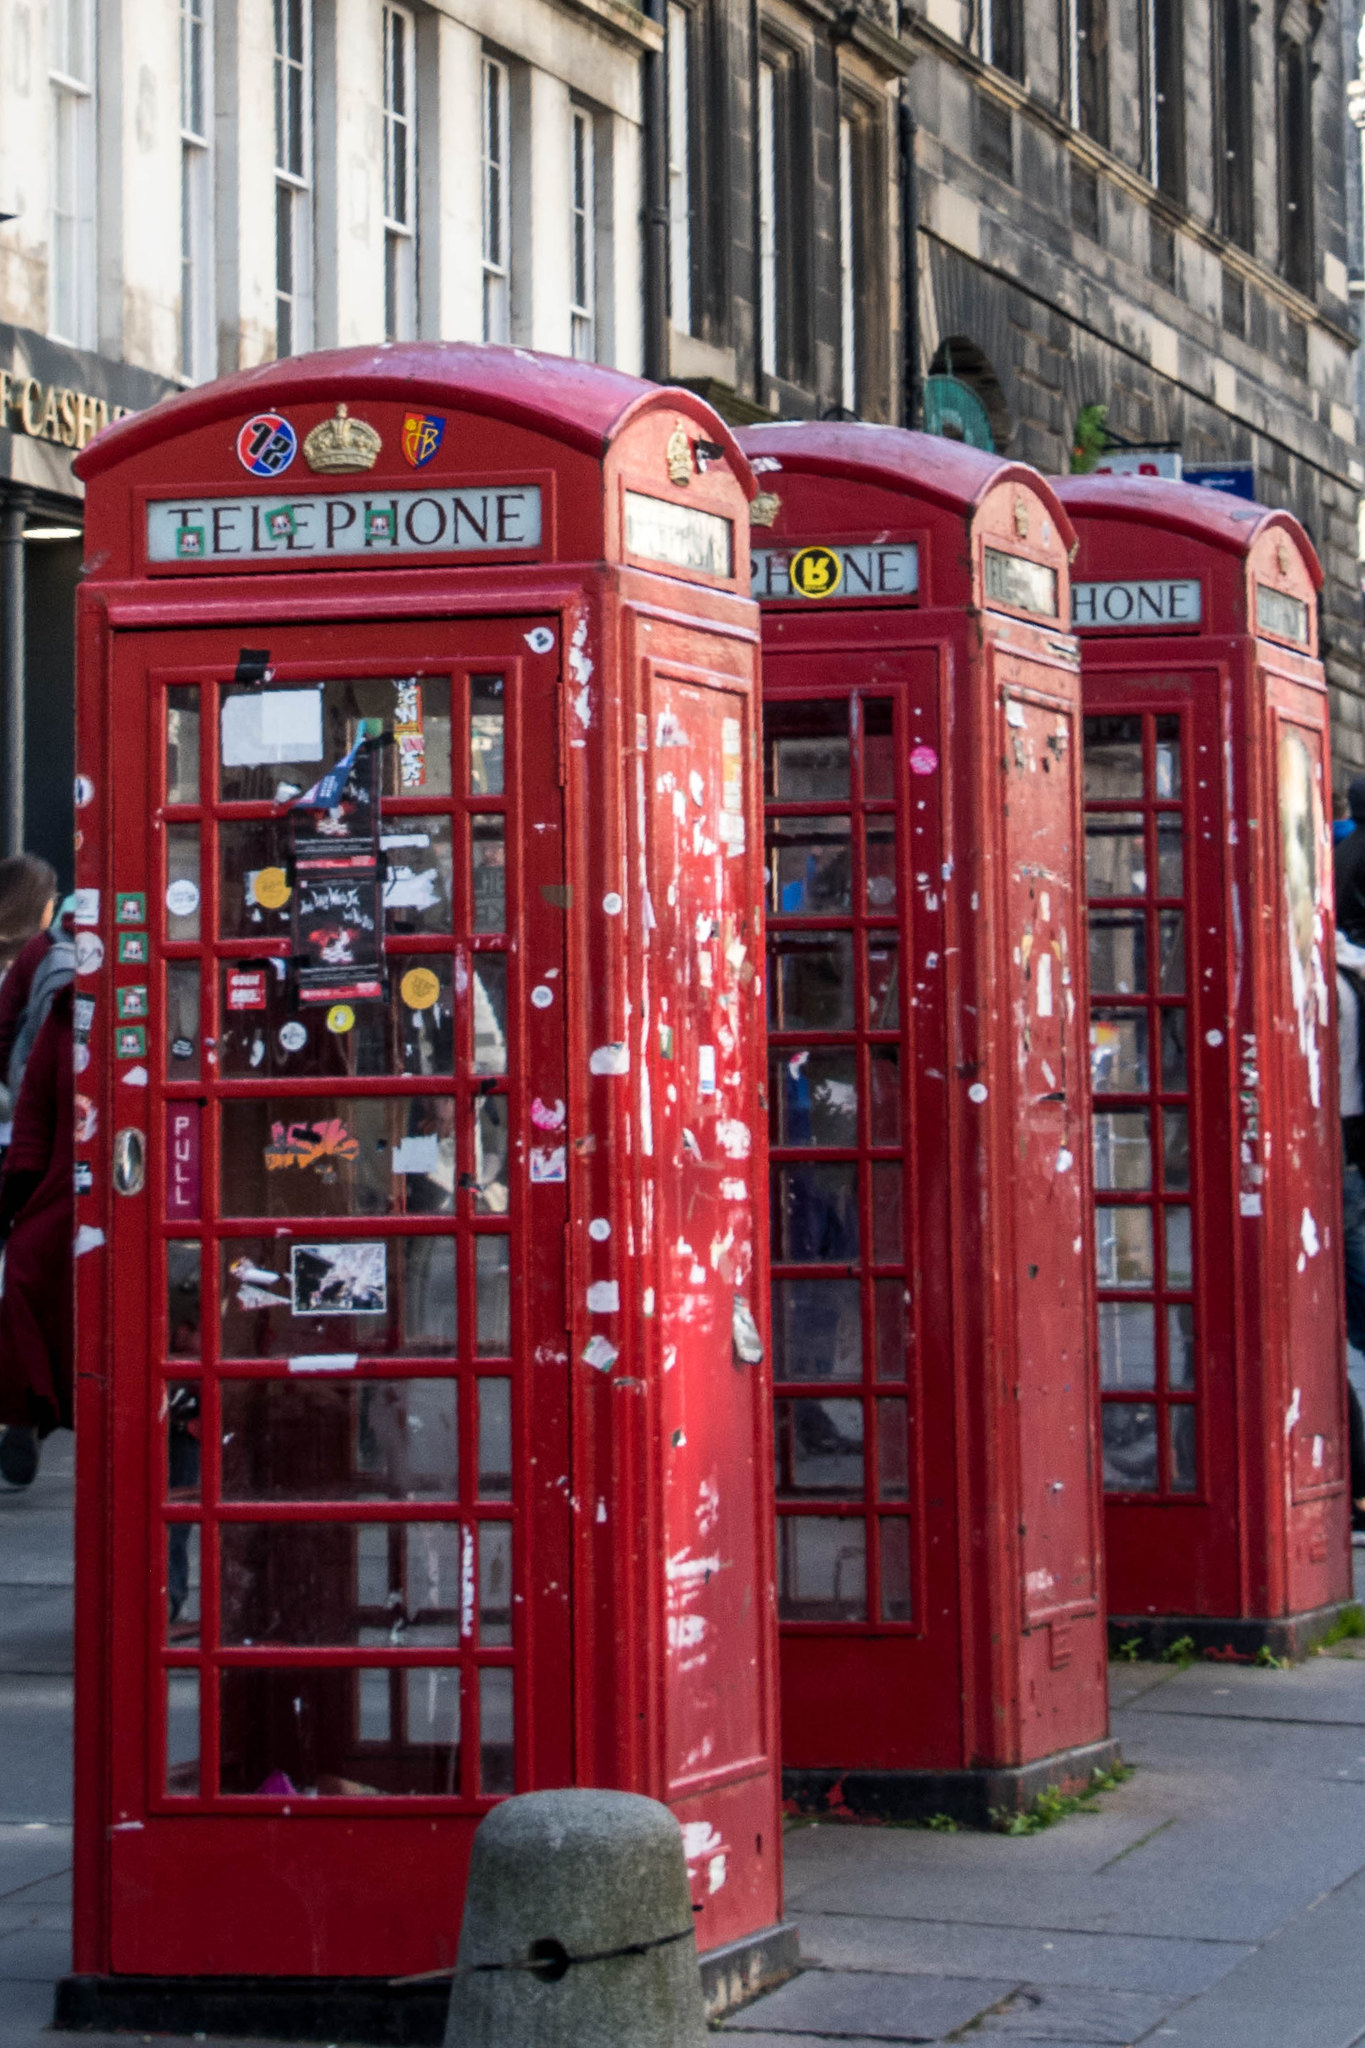 In the high street in Edinburg it is still possible to make a phone call should you have lost your smart phone :-)